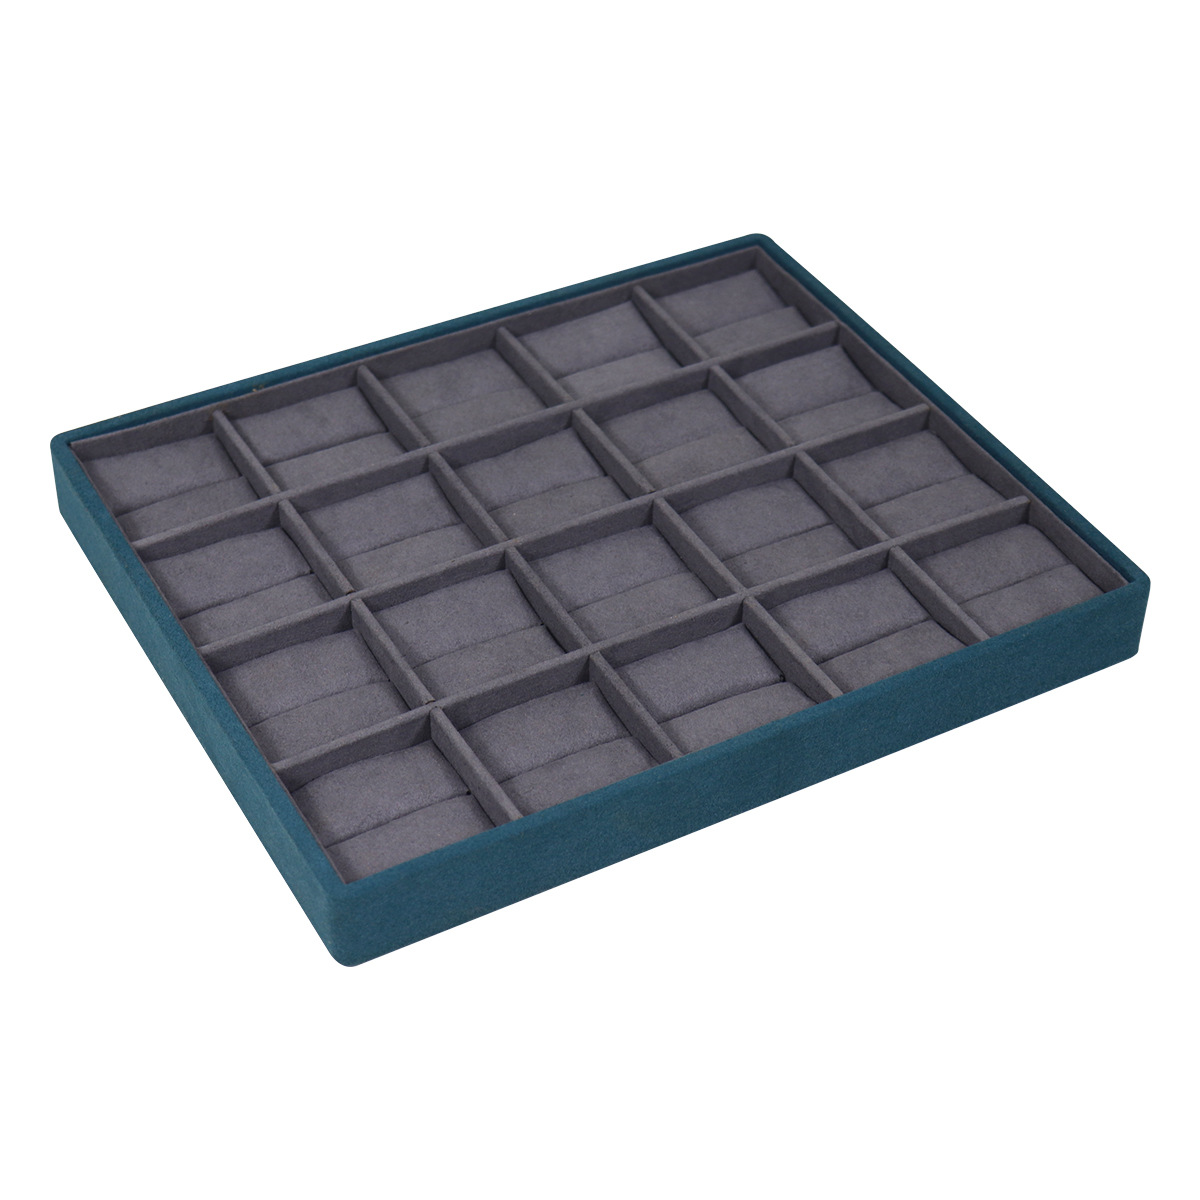 No. 11 Gray surface: 20-bit ring plate display plate